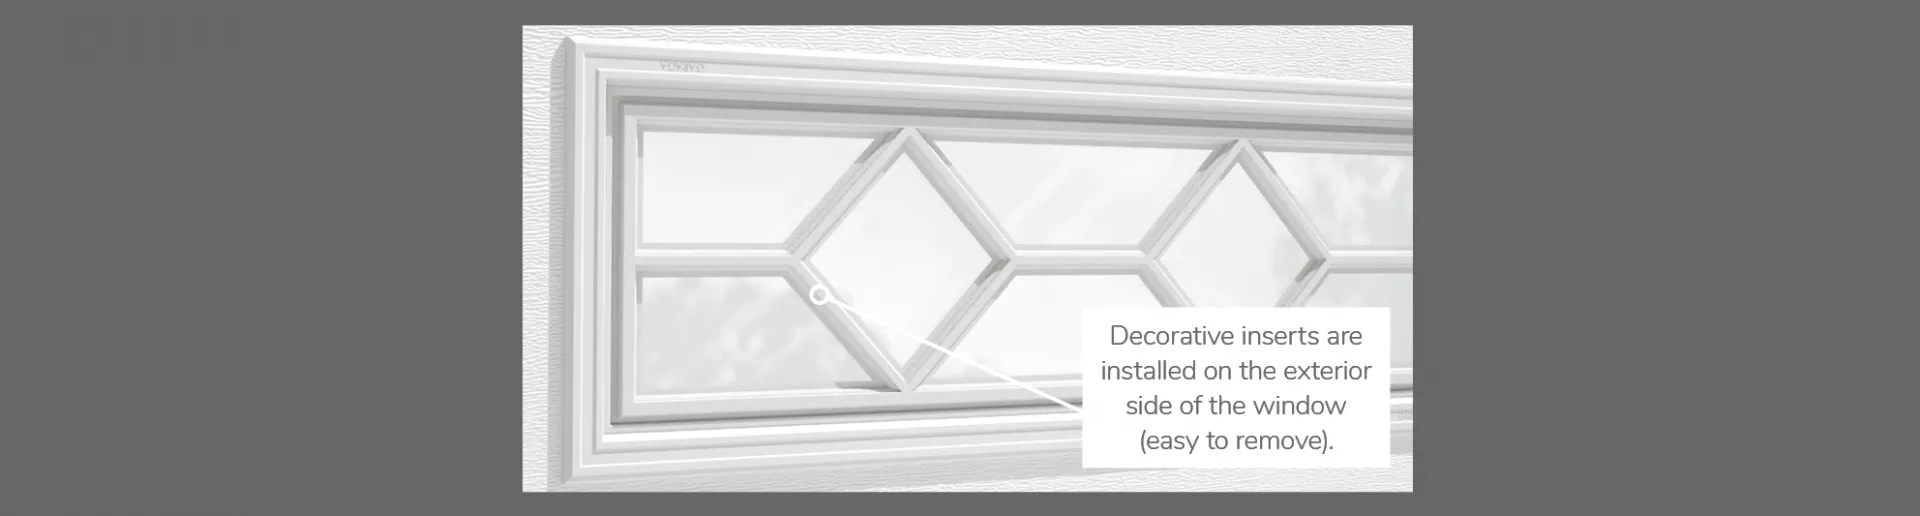 Waterton Decorative Insert, 41" x 16", available for door 3 layers - Polystyrene, 2 layers - Polystyrene and Non-insulated